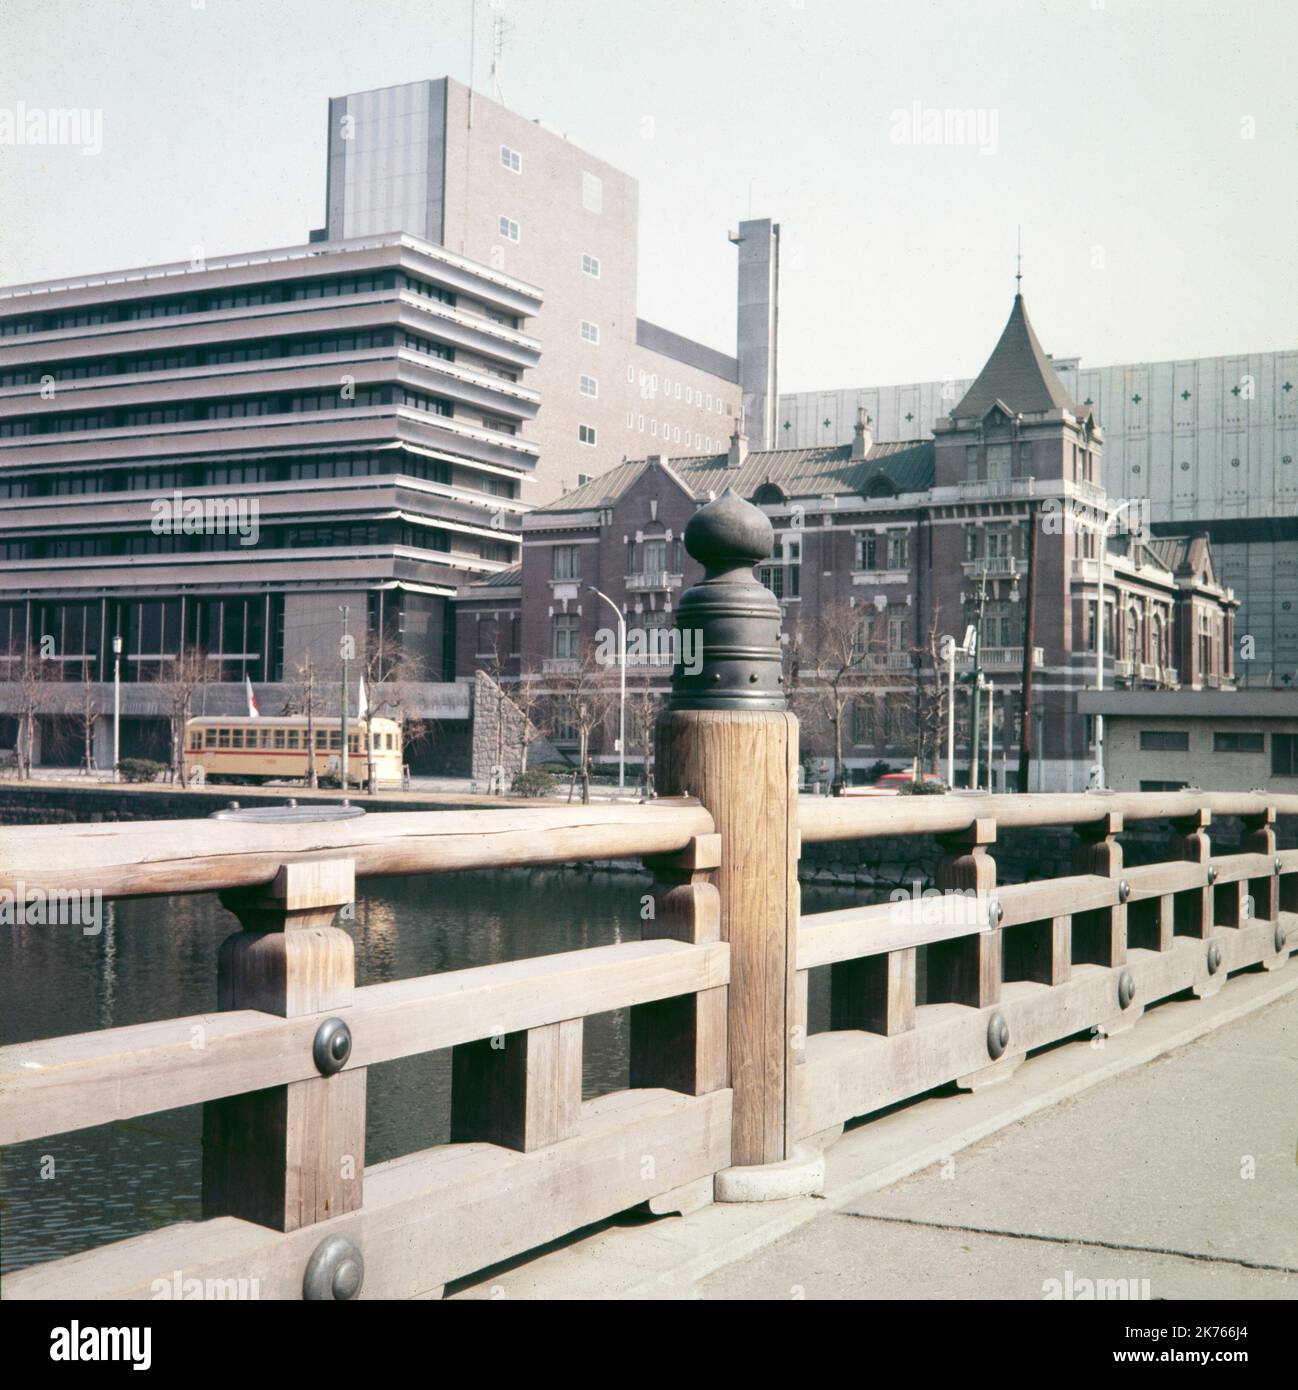 A vintage 1967 colour photograph showing the Marunouchi District of Tokyo in Japan. Stock Photo